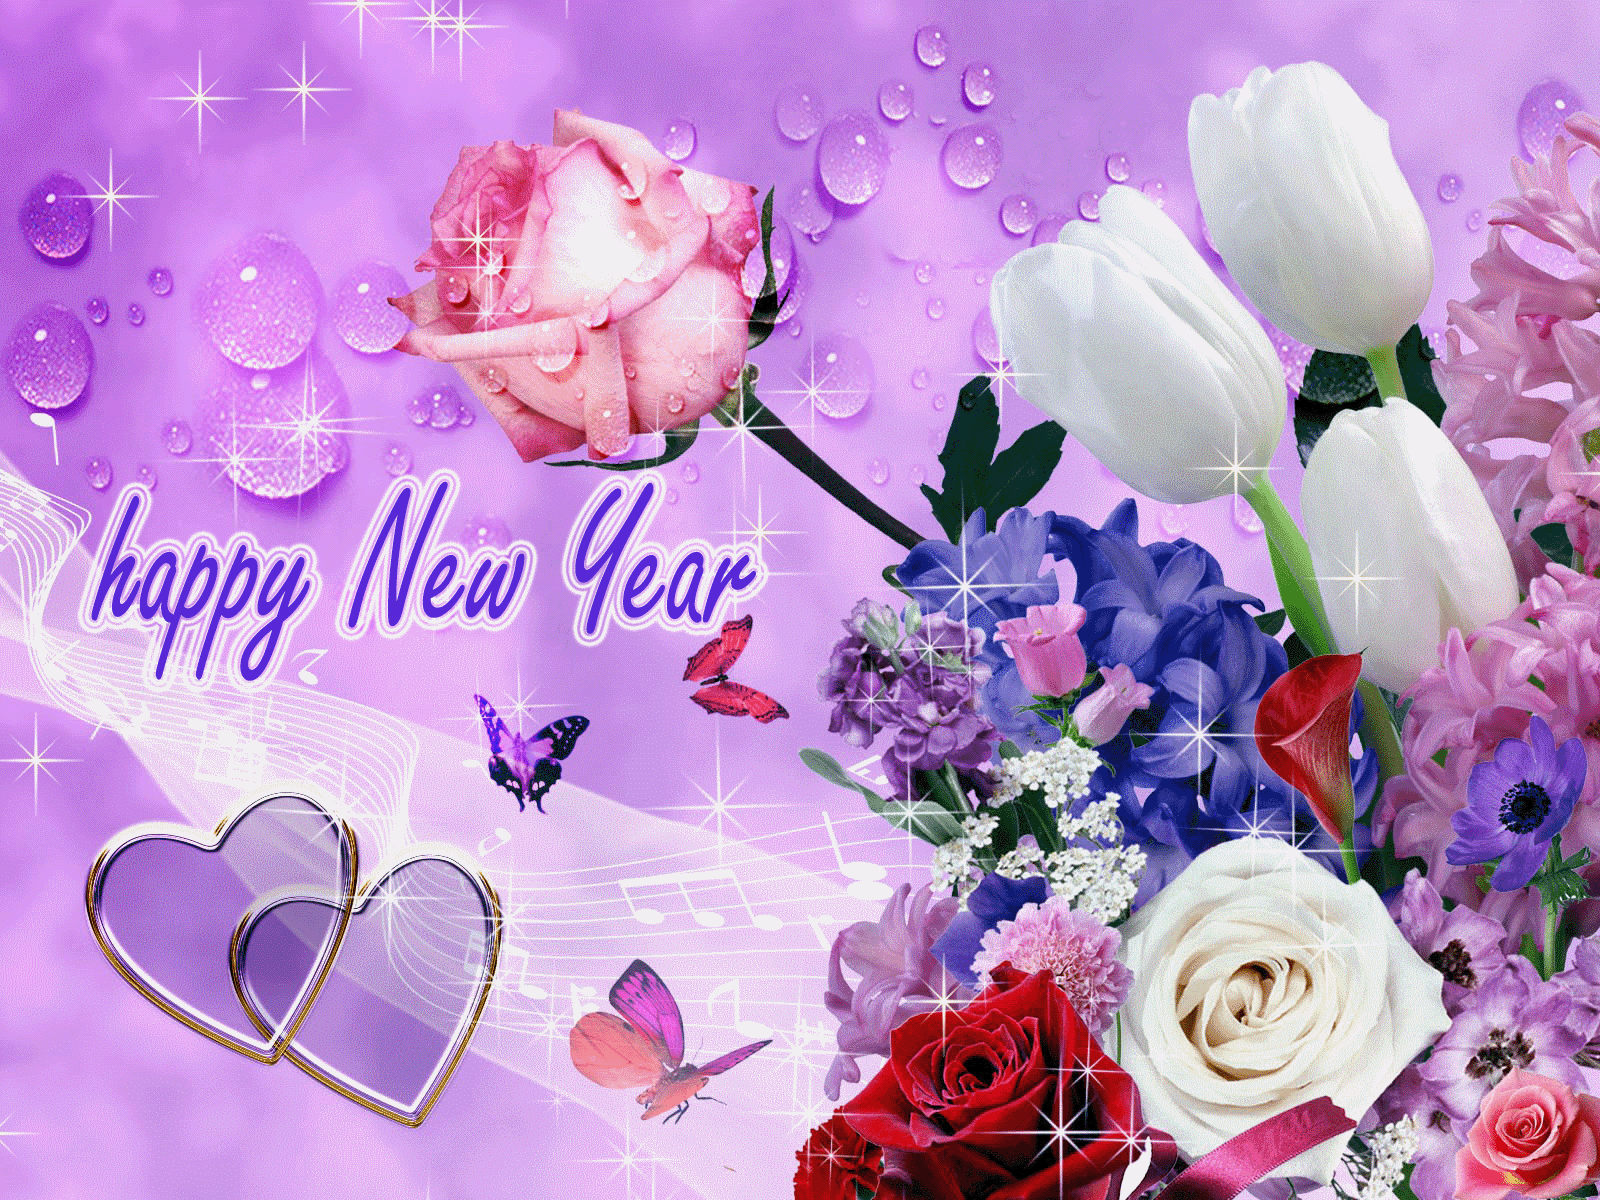 Animated Happy New Year 2017 Images Wallpapers